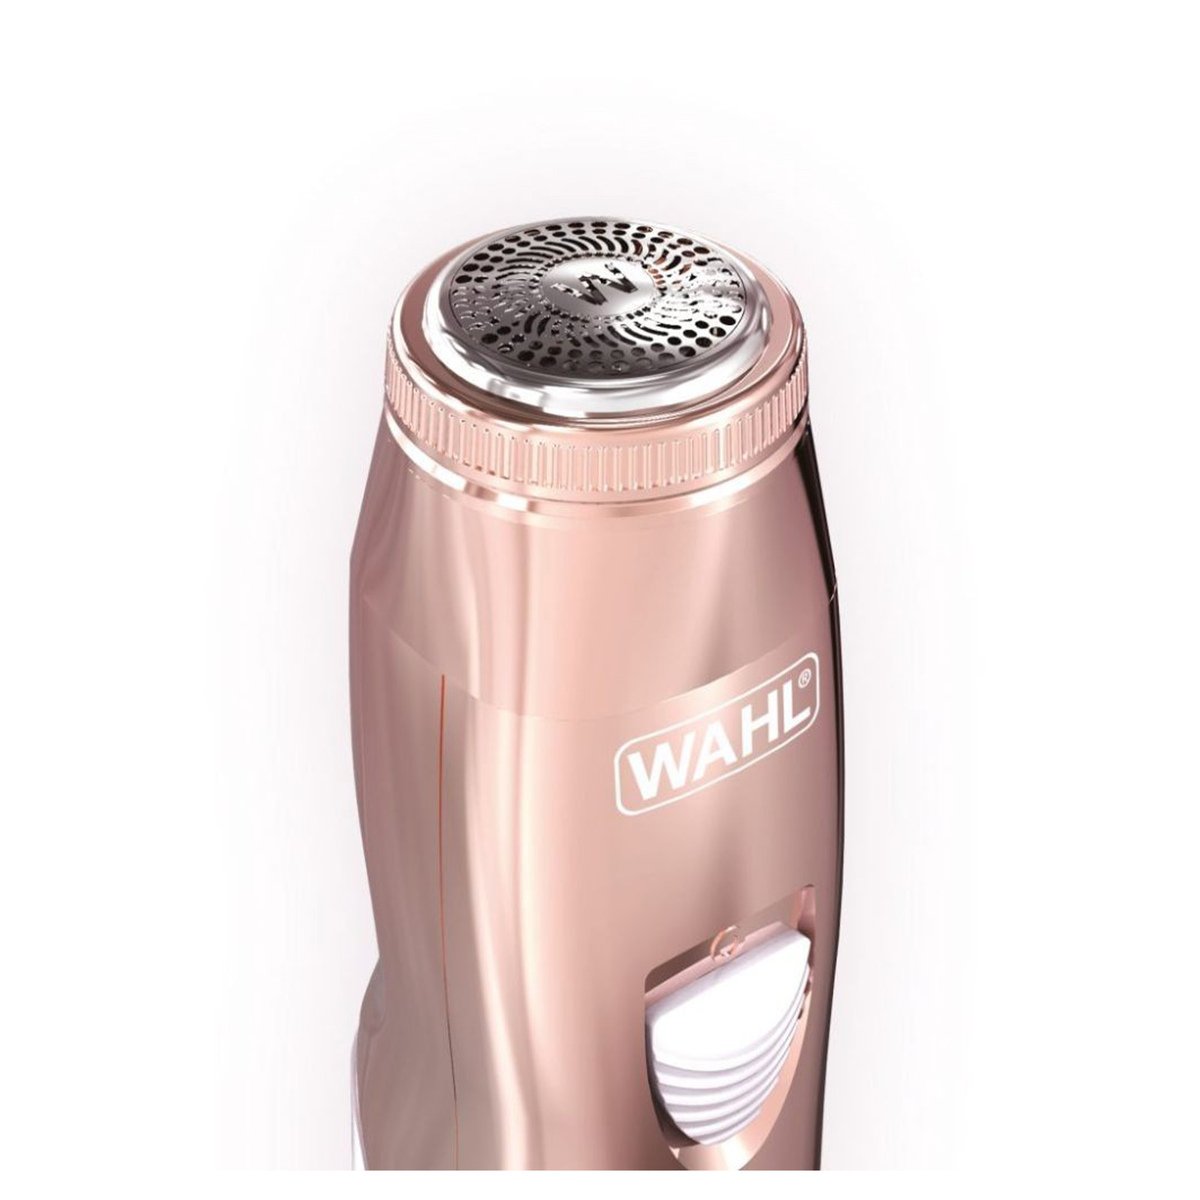 Wahl Rechargeable Grooming Kit 9865-4027